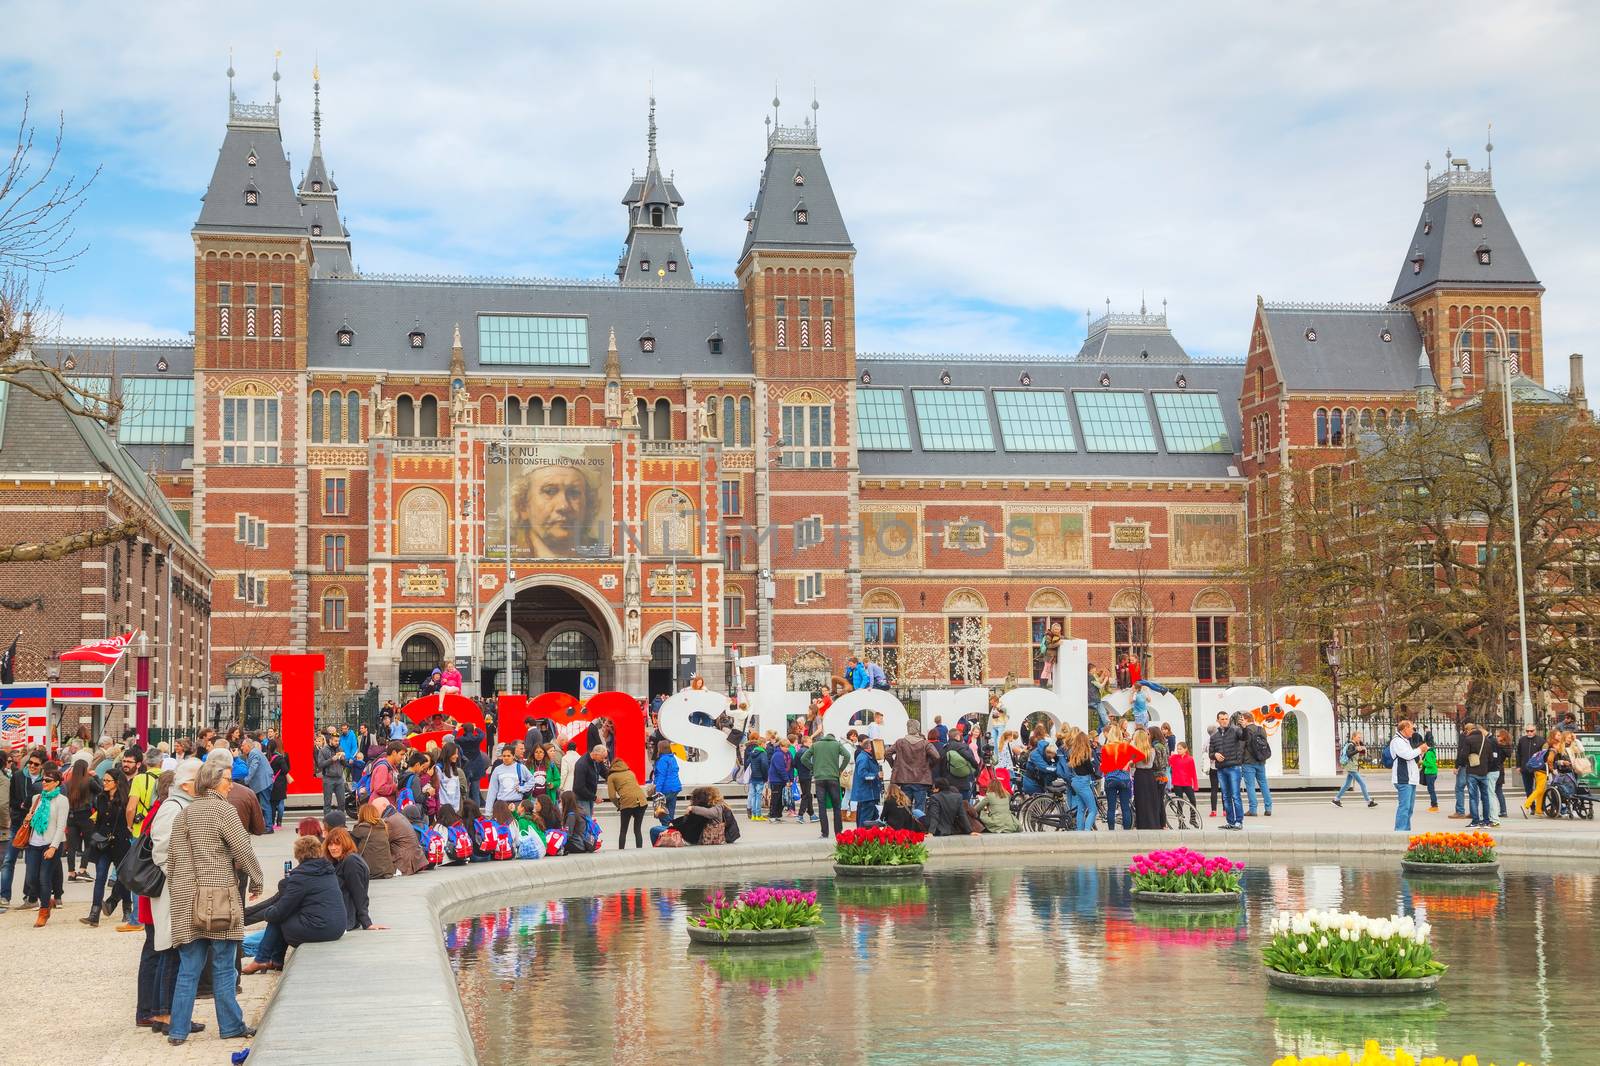 AMSTERDAM - APRIL 16: I Amsterdam slogan with crowd of tourists on April 16, 2015 in Amsterdam. Located at the back of the Rijksmuseum on Museumplein, the slogan quickly became a city icon.